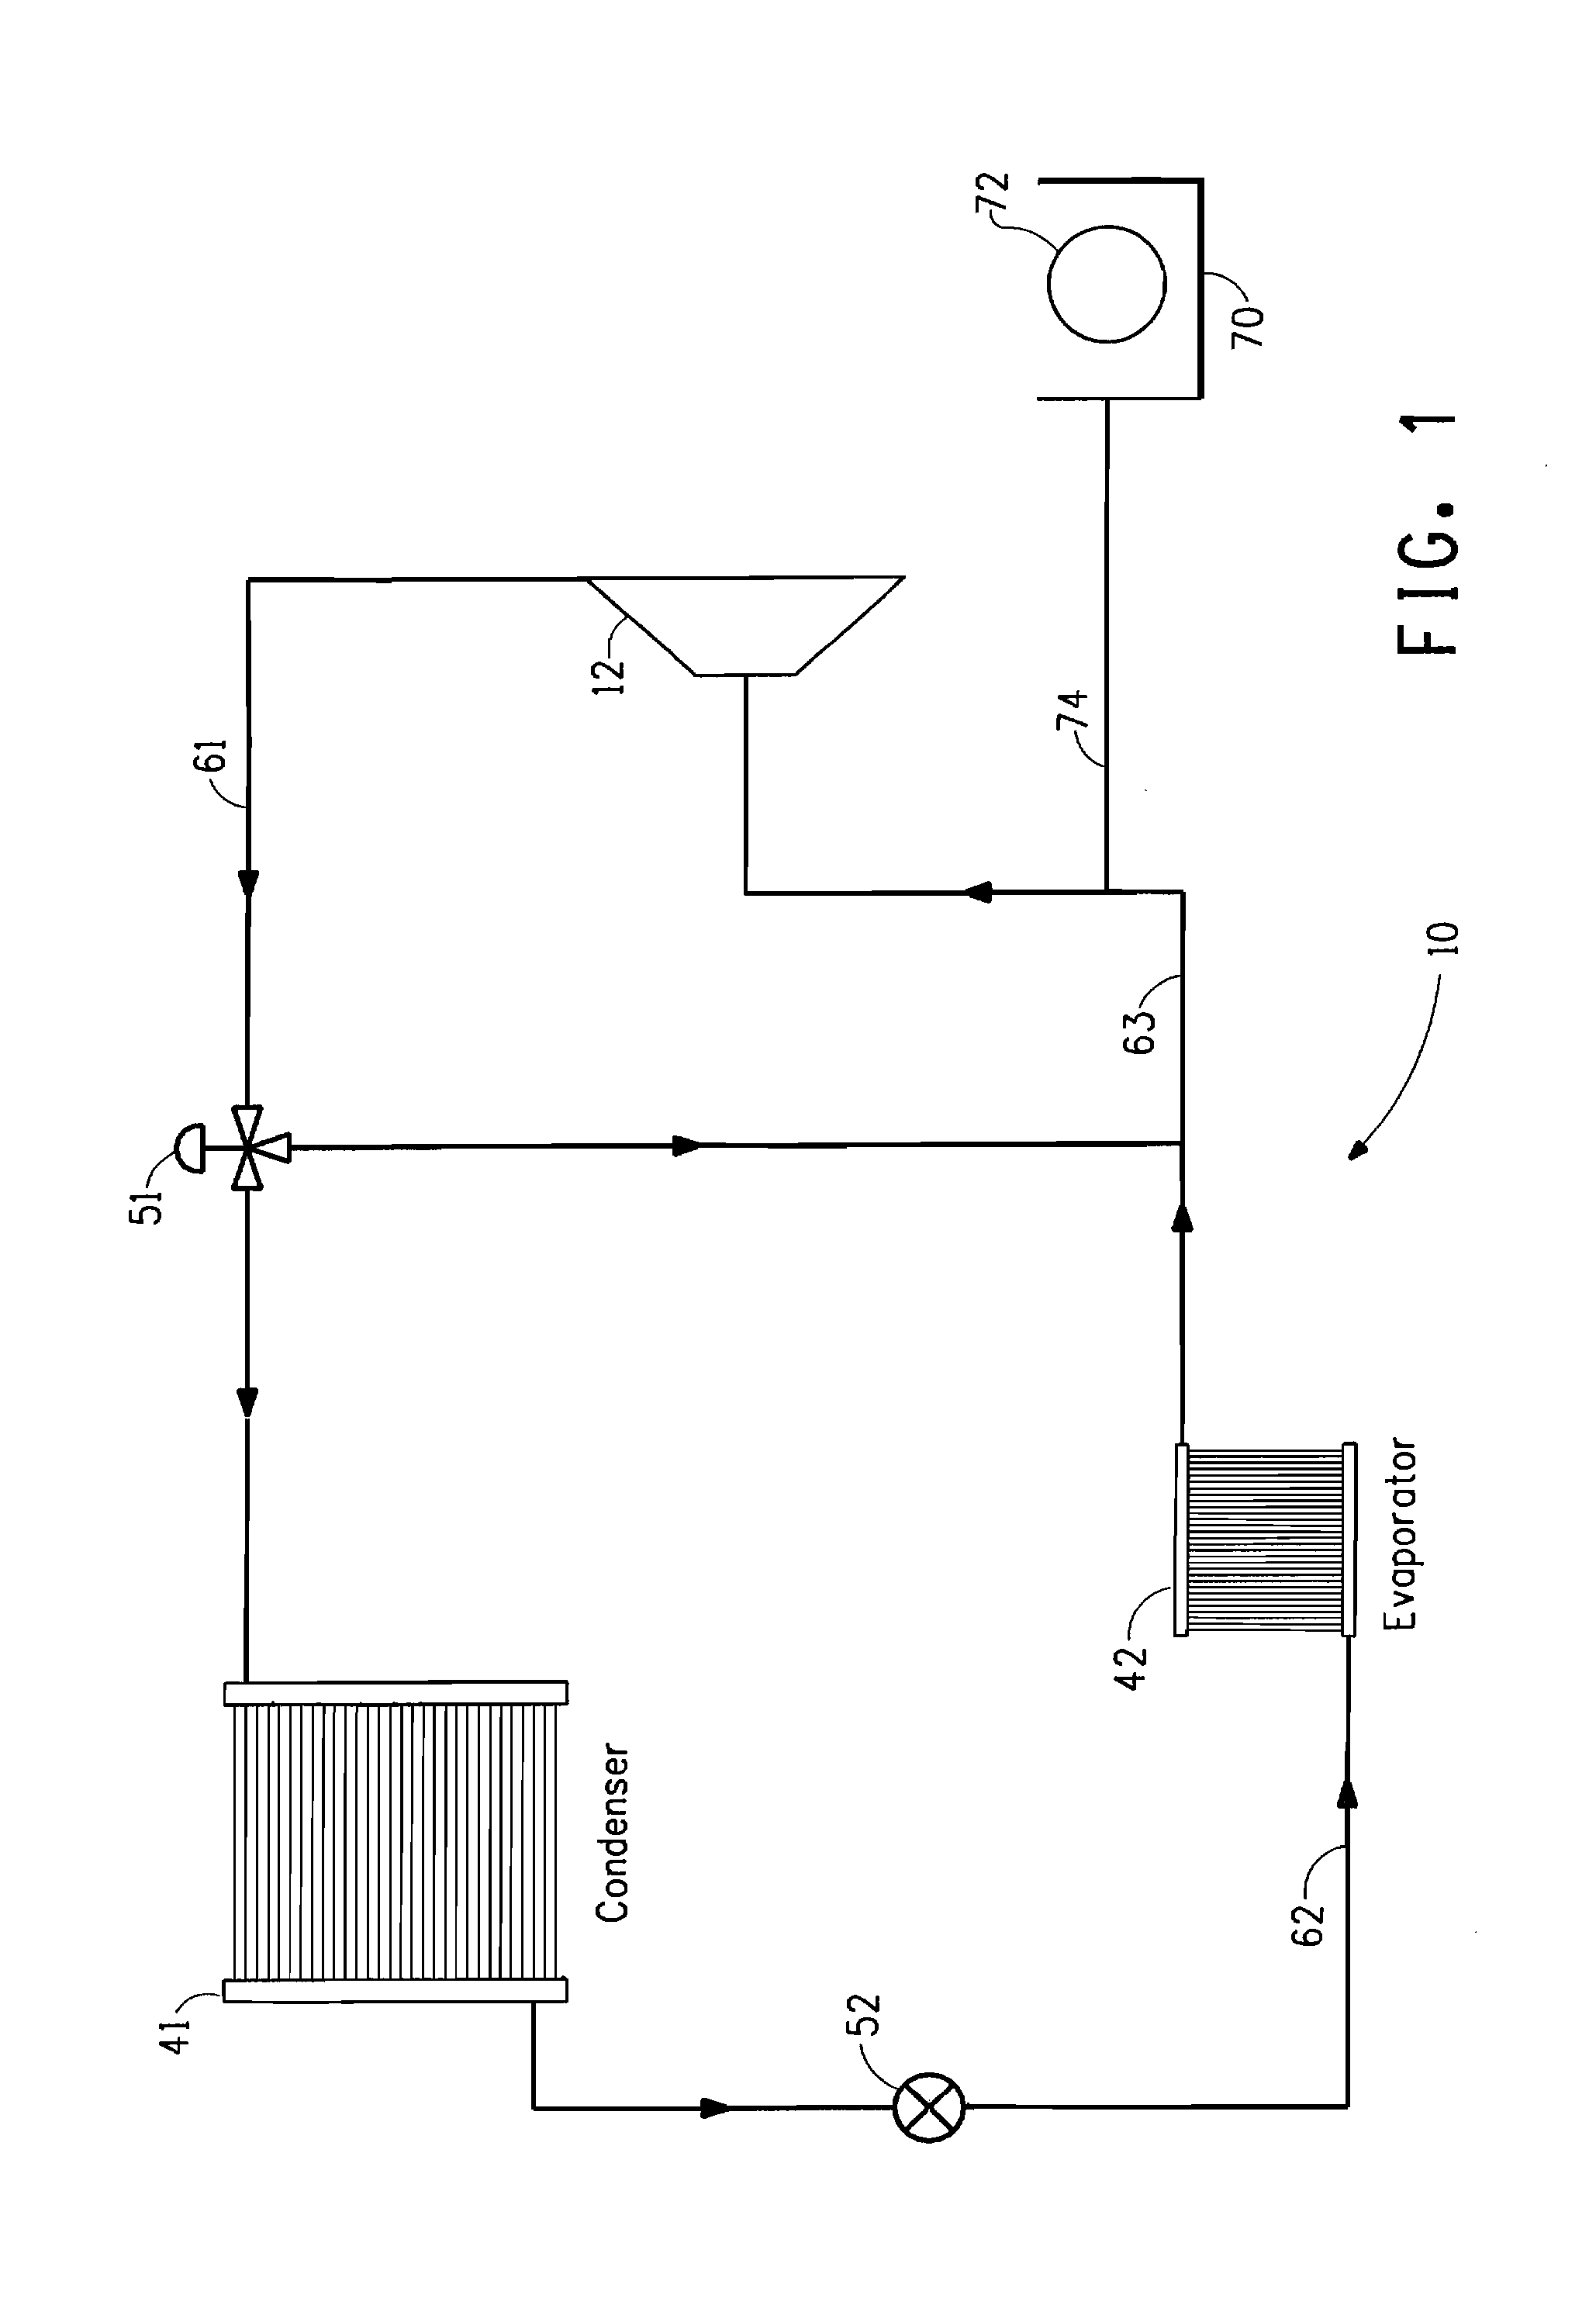 Method of detecting leaks of fluoroolefin compositions and sensors used therefor